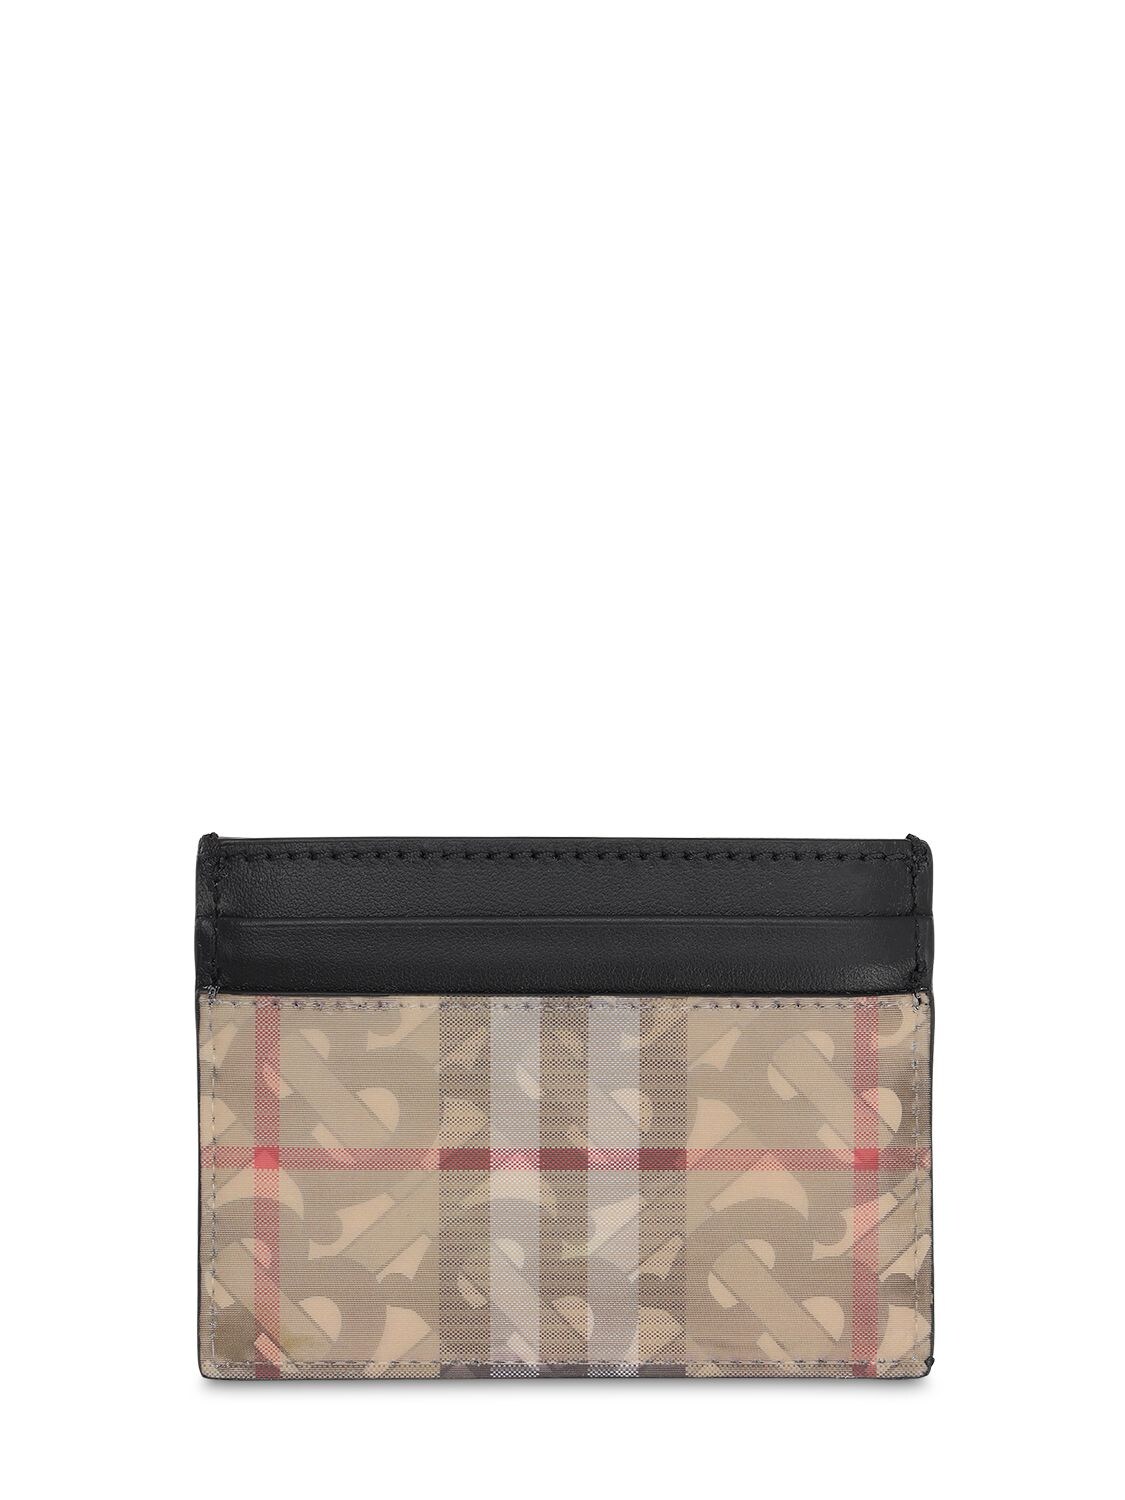 Burberry Check Tb Hologram Tpu Card Holder In Archive Beige